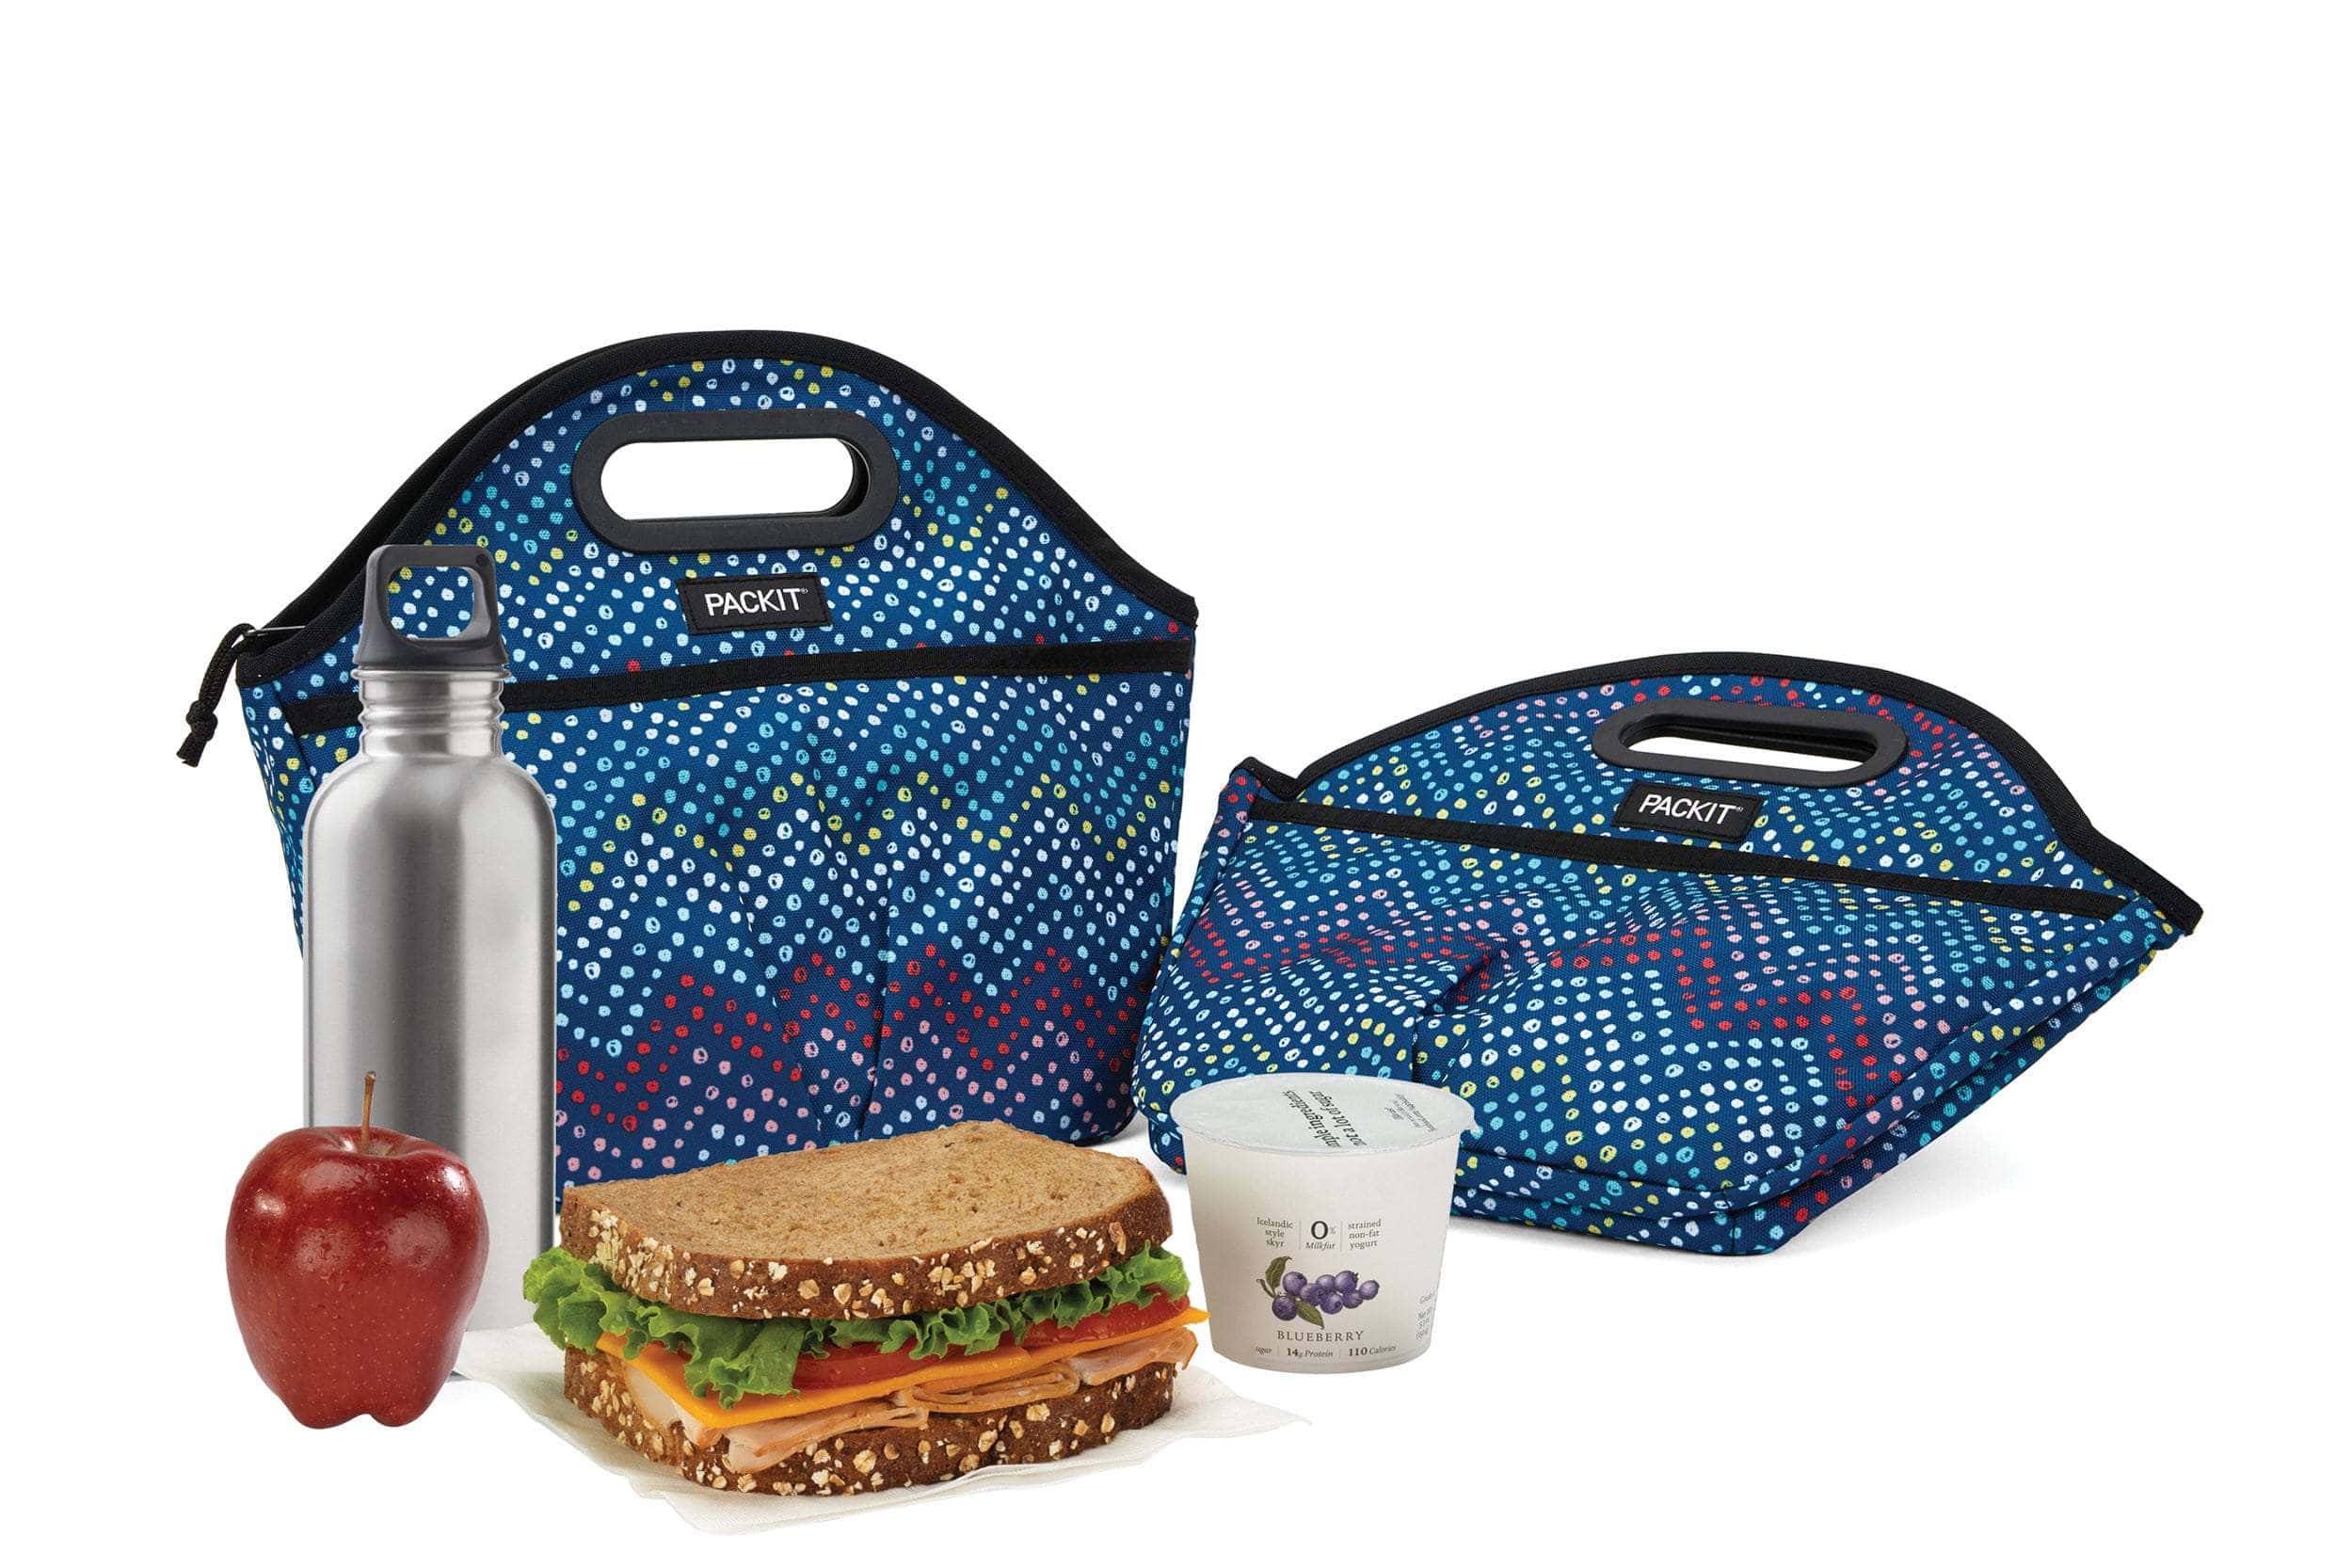 best travel lunch bags